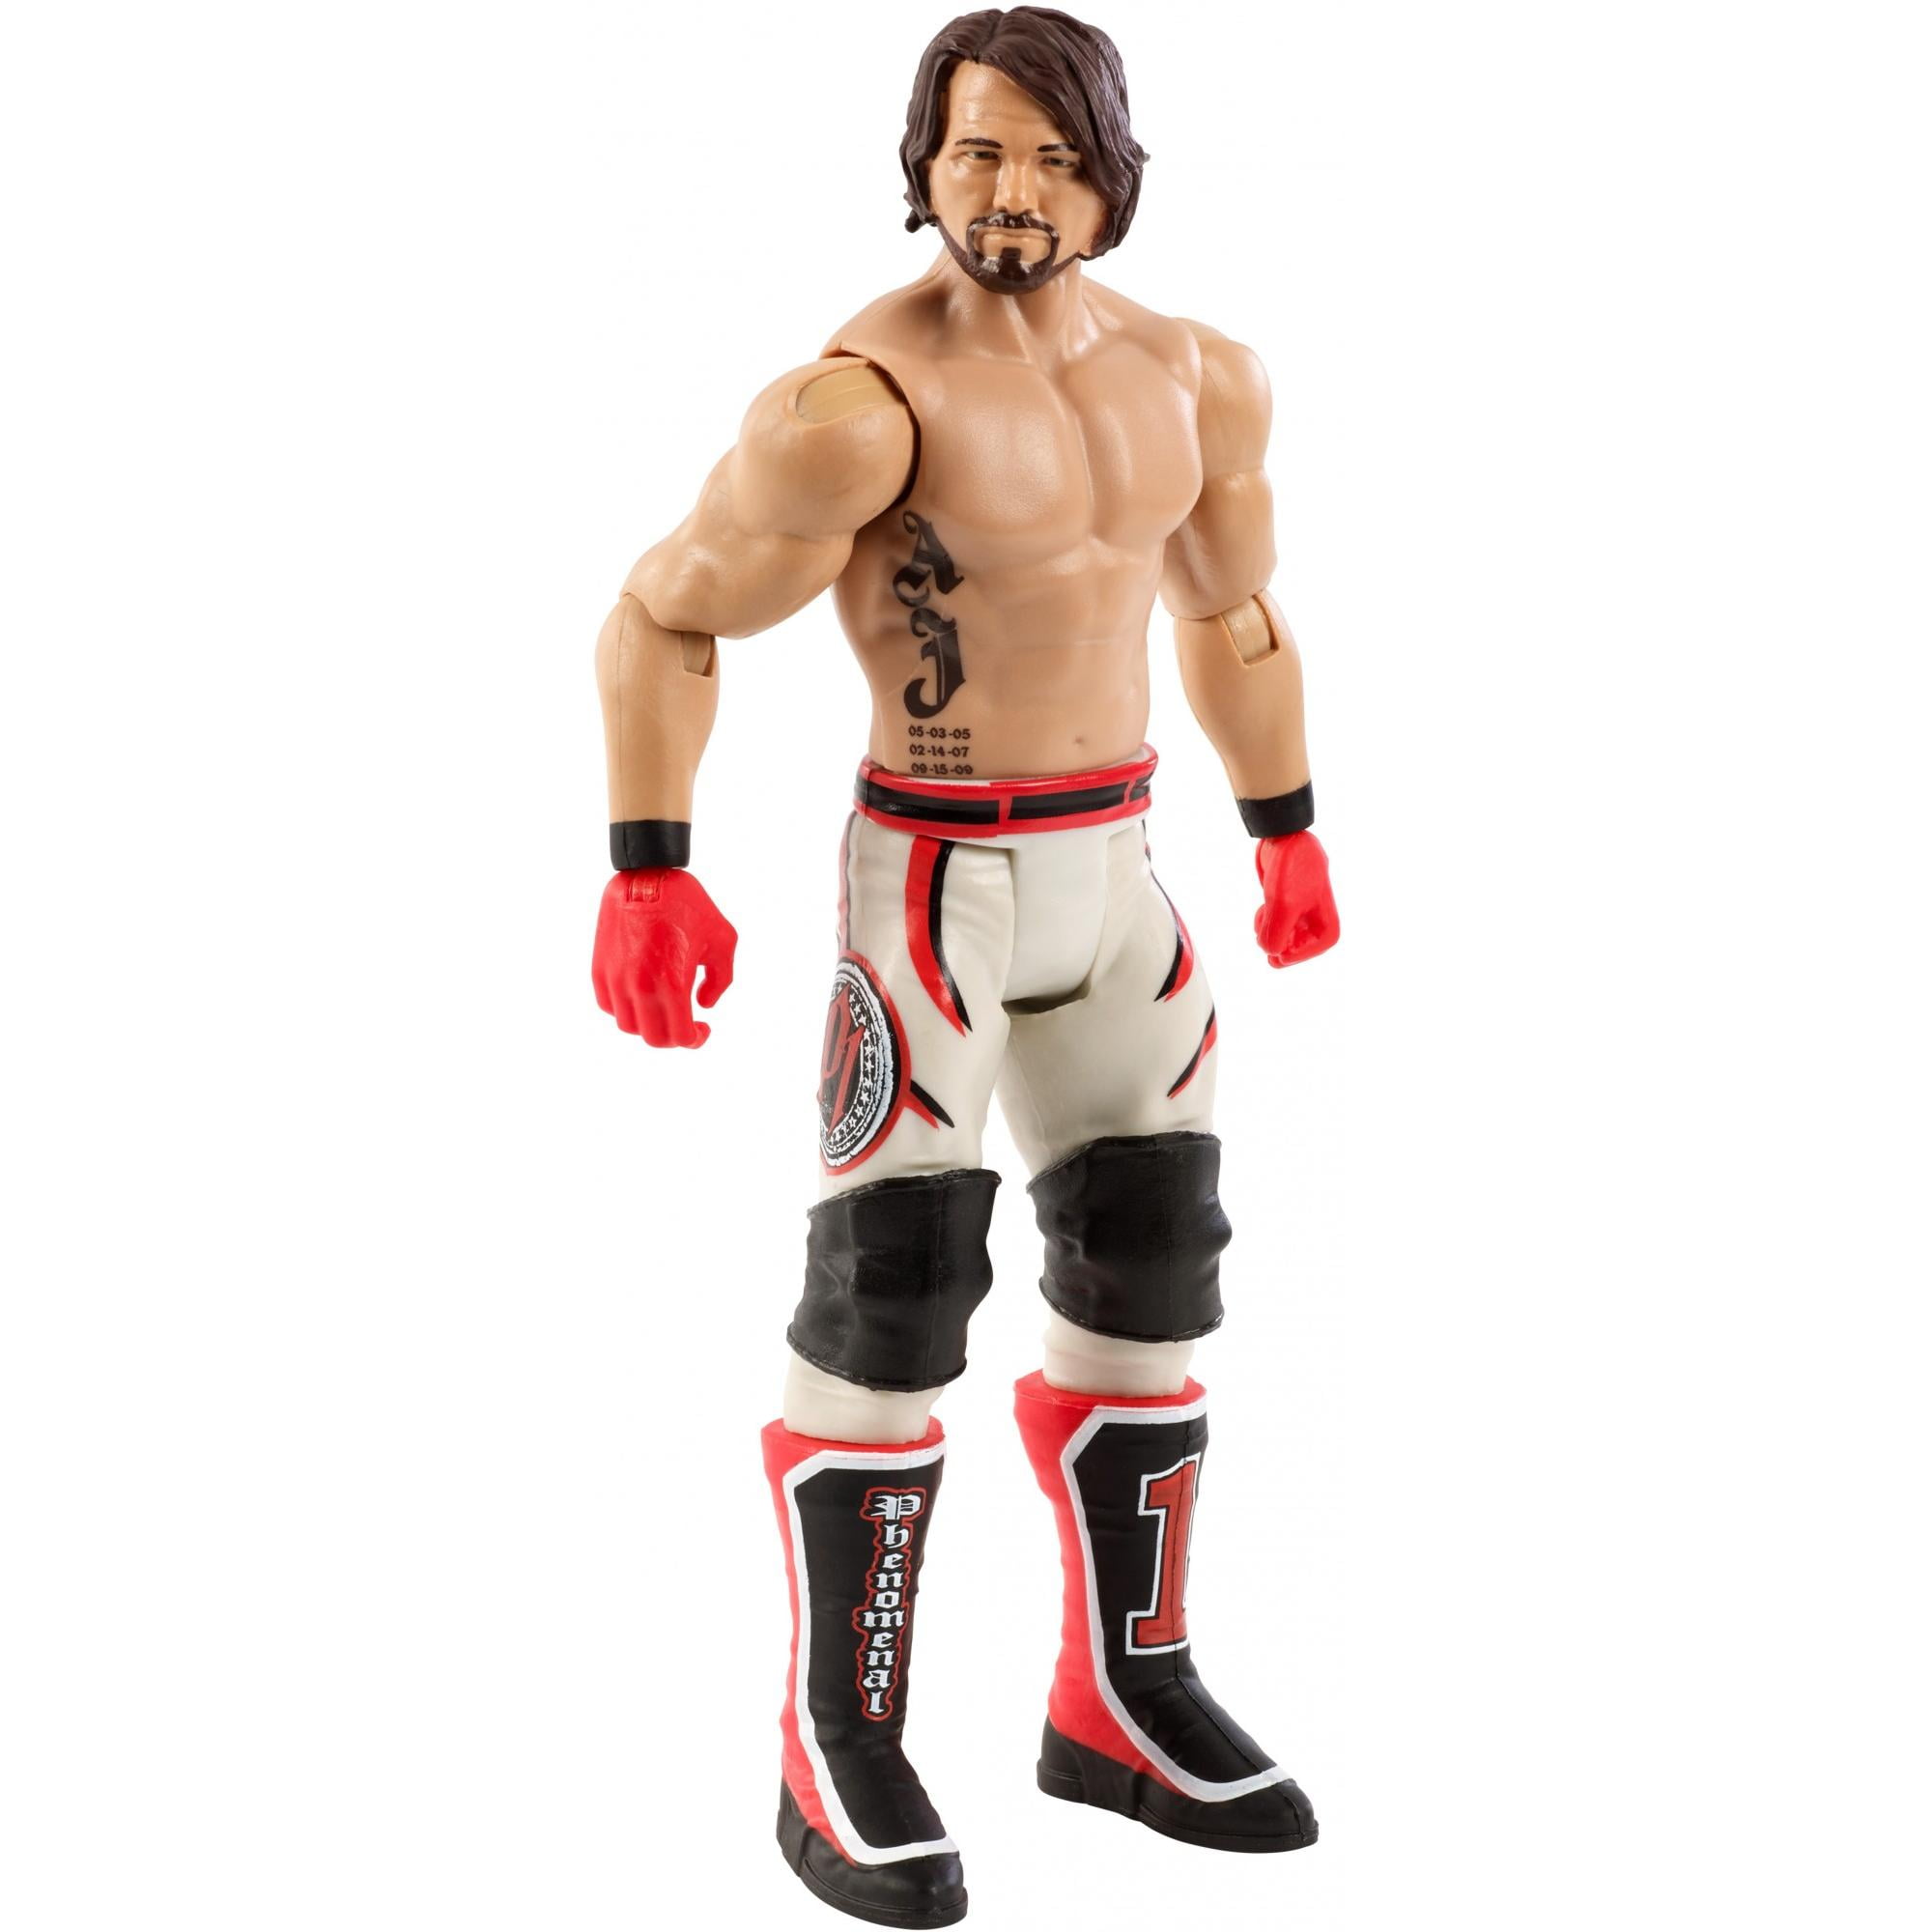 Details about   WWE: Wrestling 3" Action Figure Toy Mattel AJ Styles Micro Collection, 